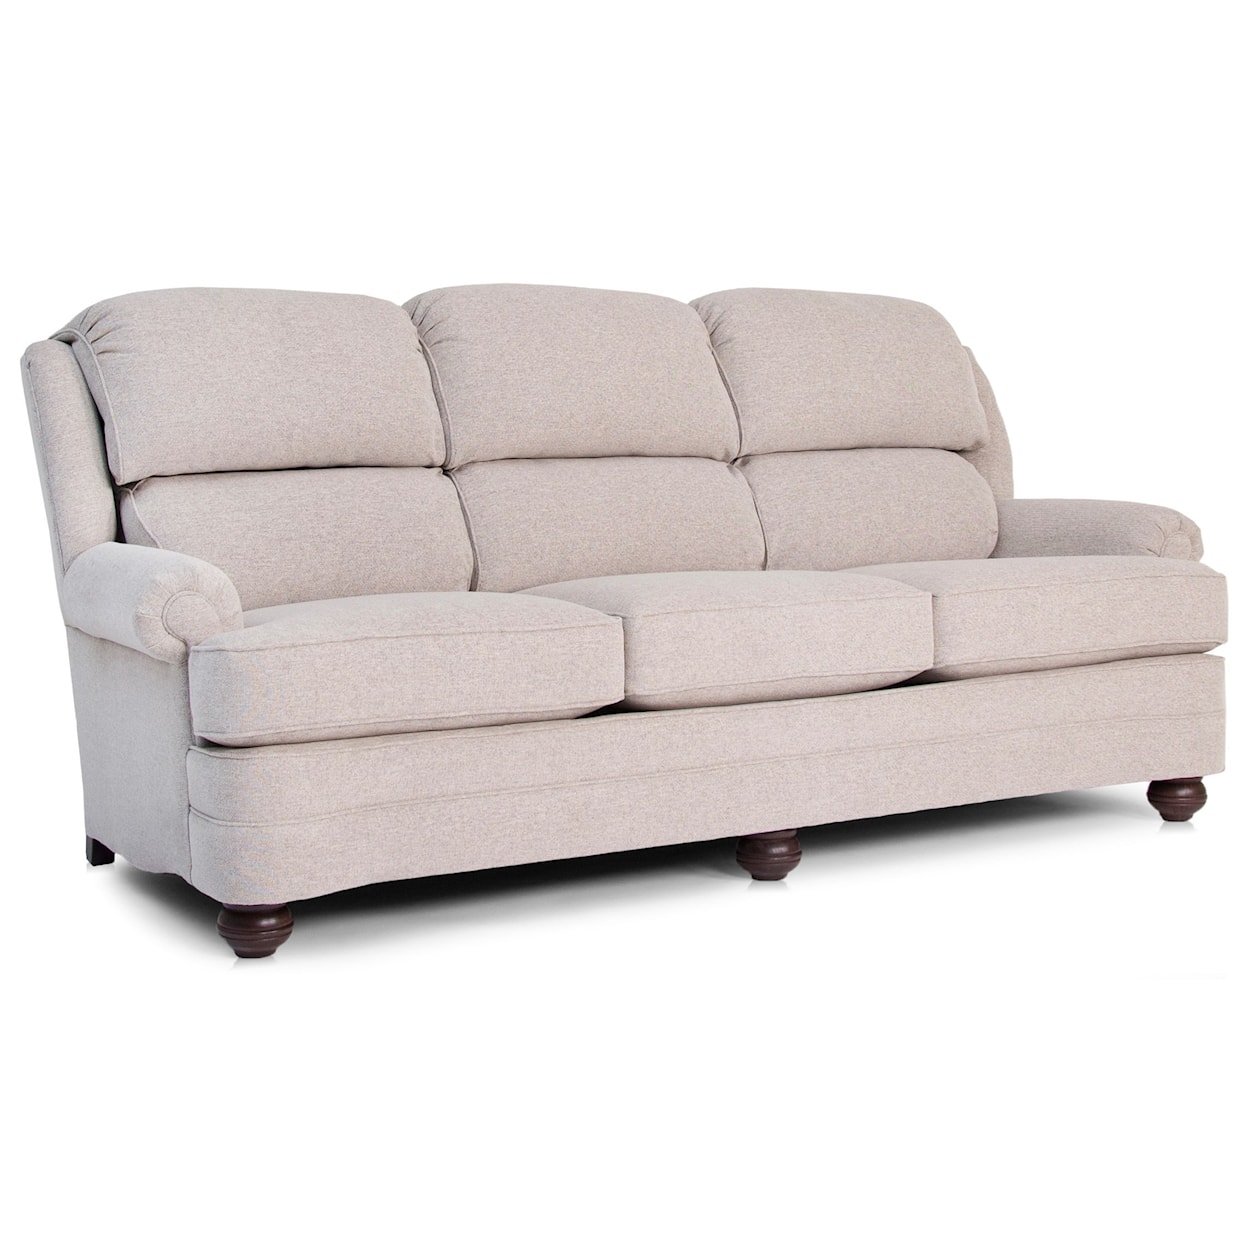 Smith Brothers 311 Upholstered Stationary Sofa